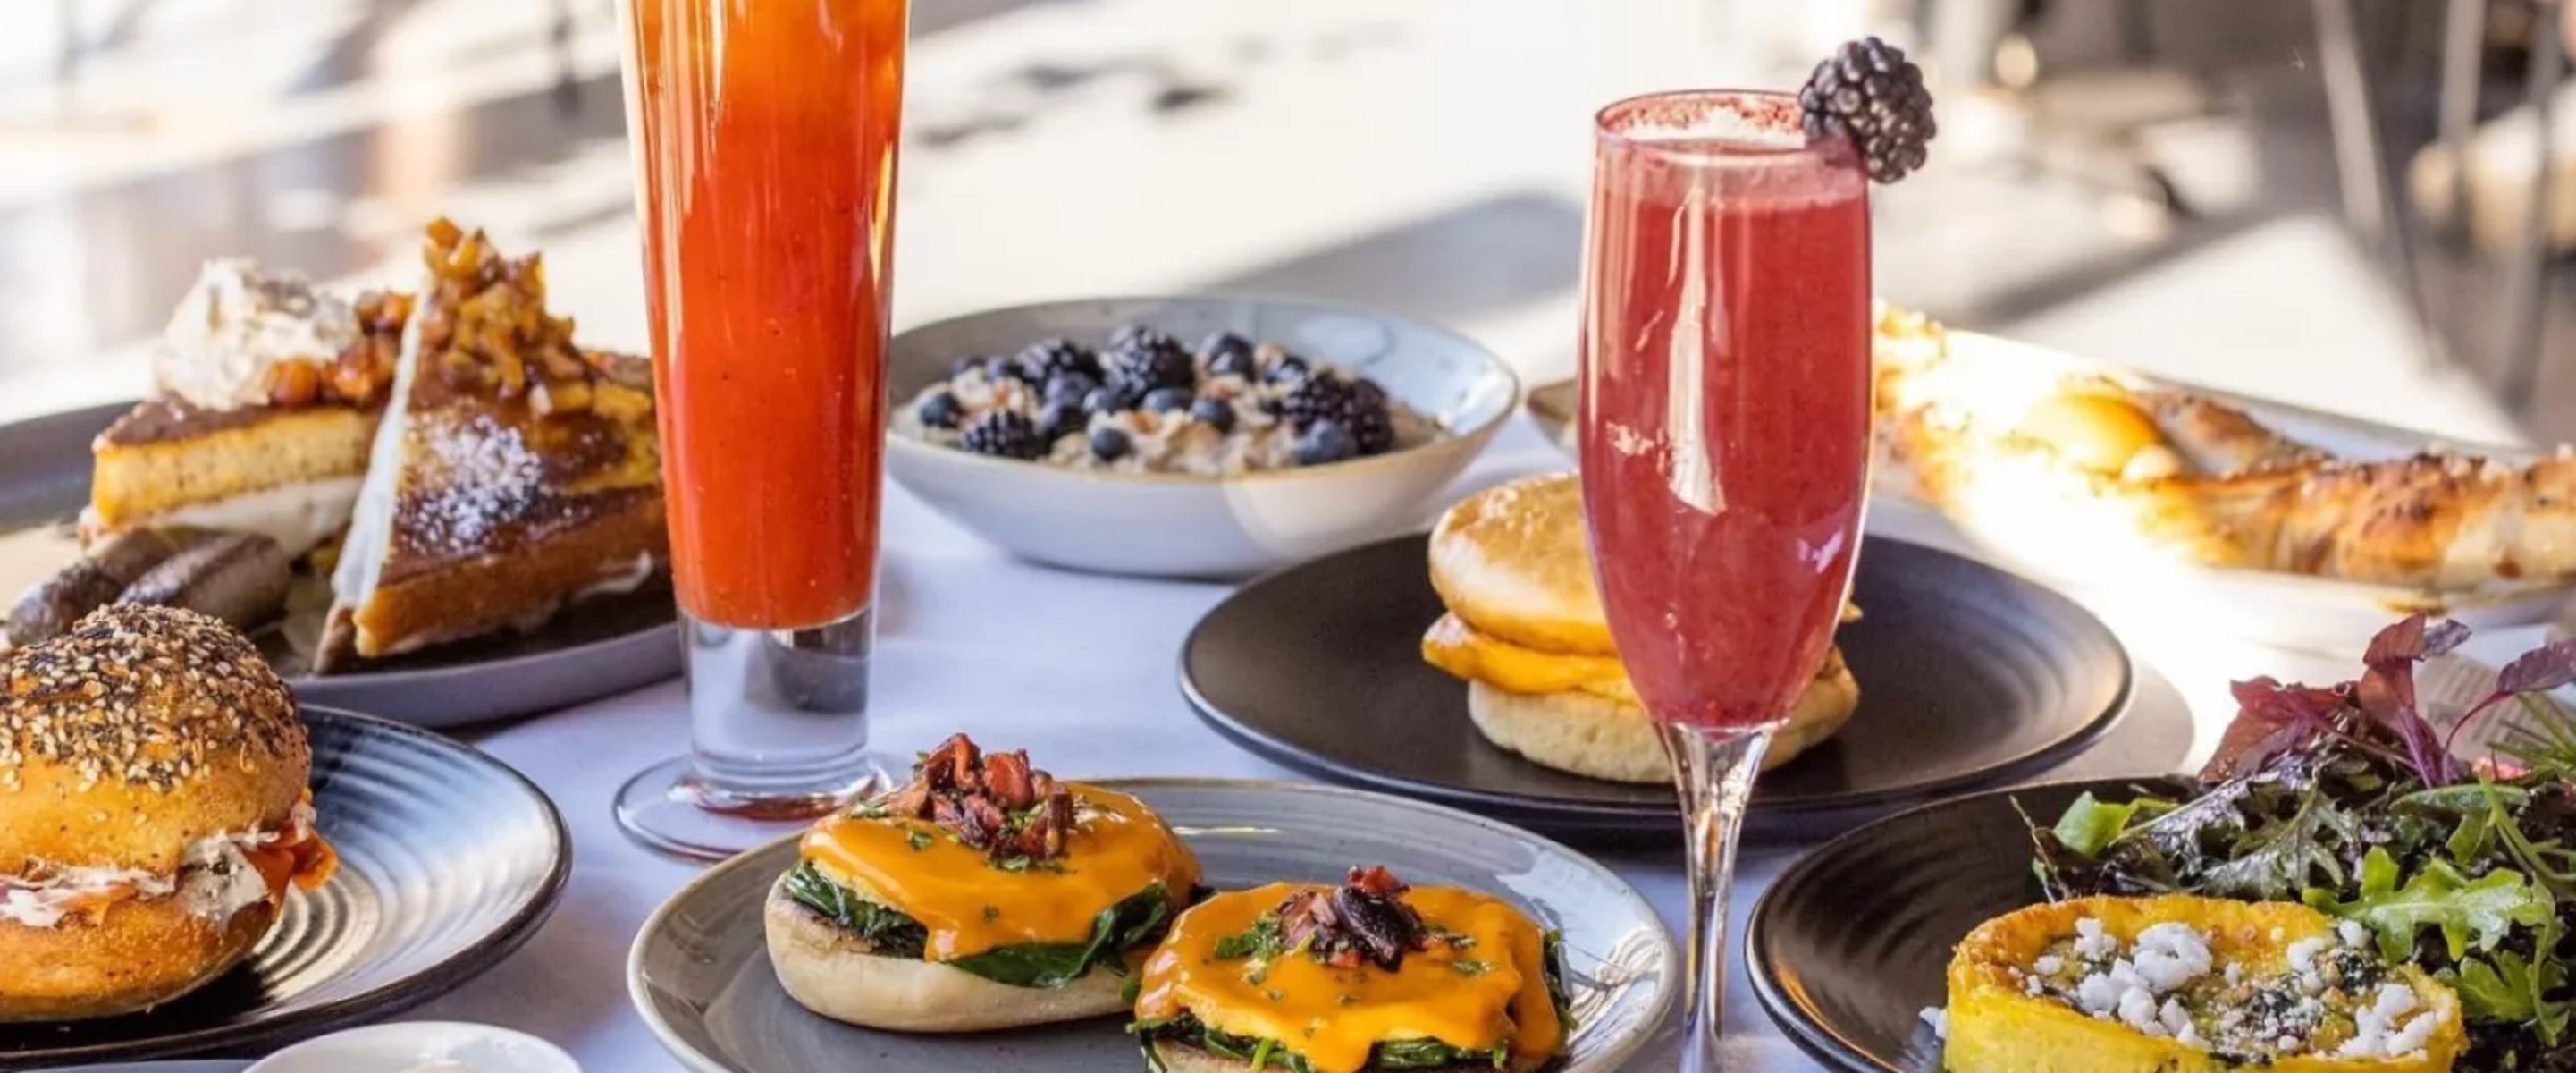 Where to Find the Best Vegan Brunch in Los Angeles